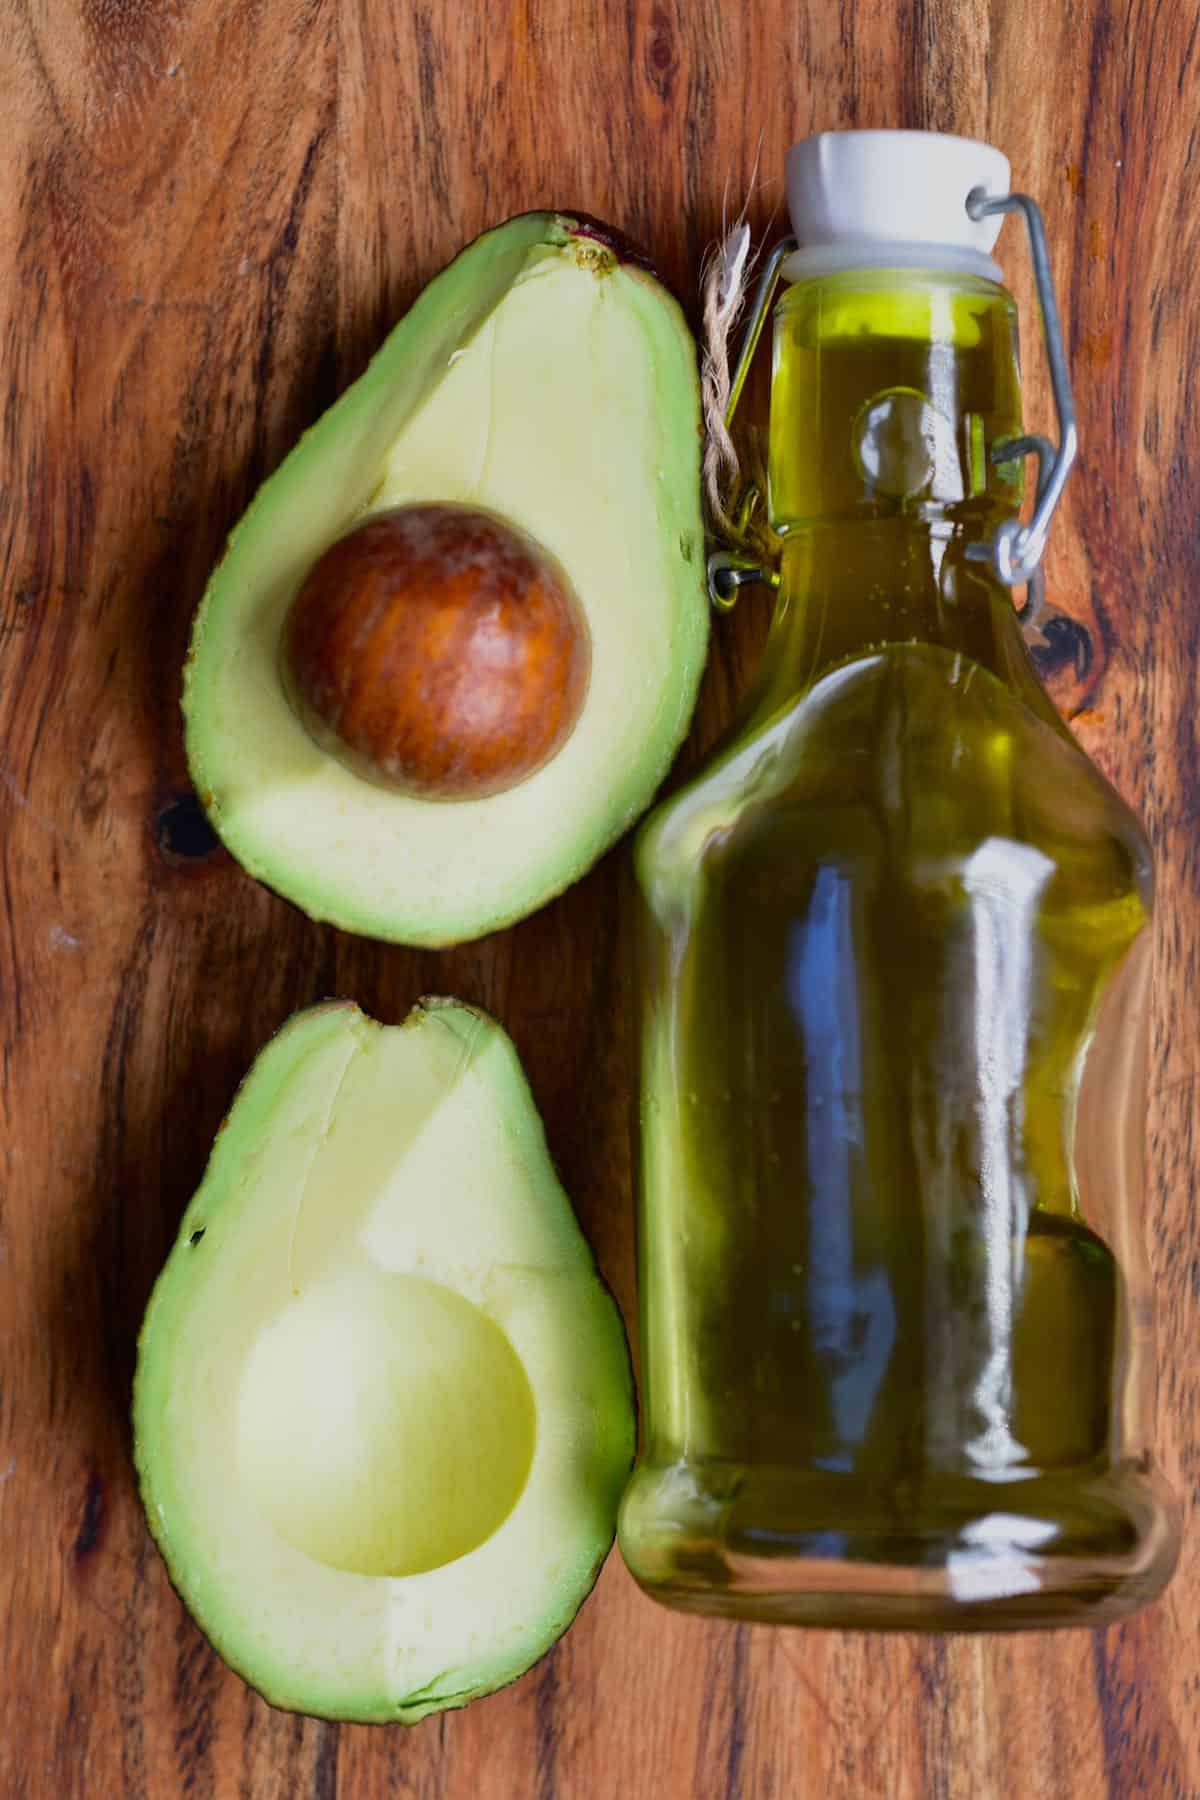 How to make avocado oil  Cold extraction 